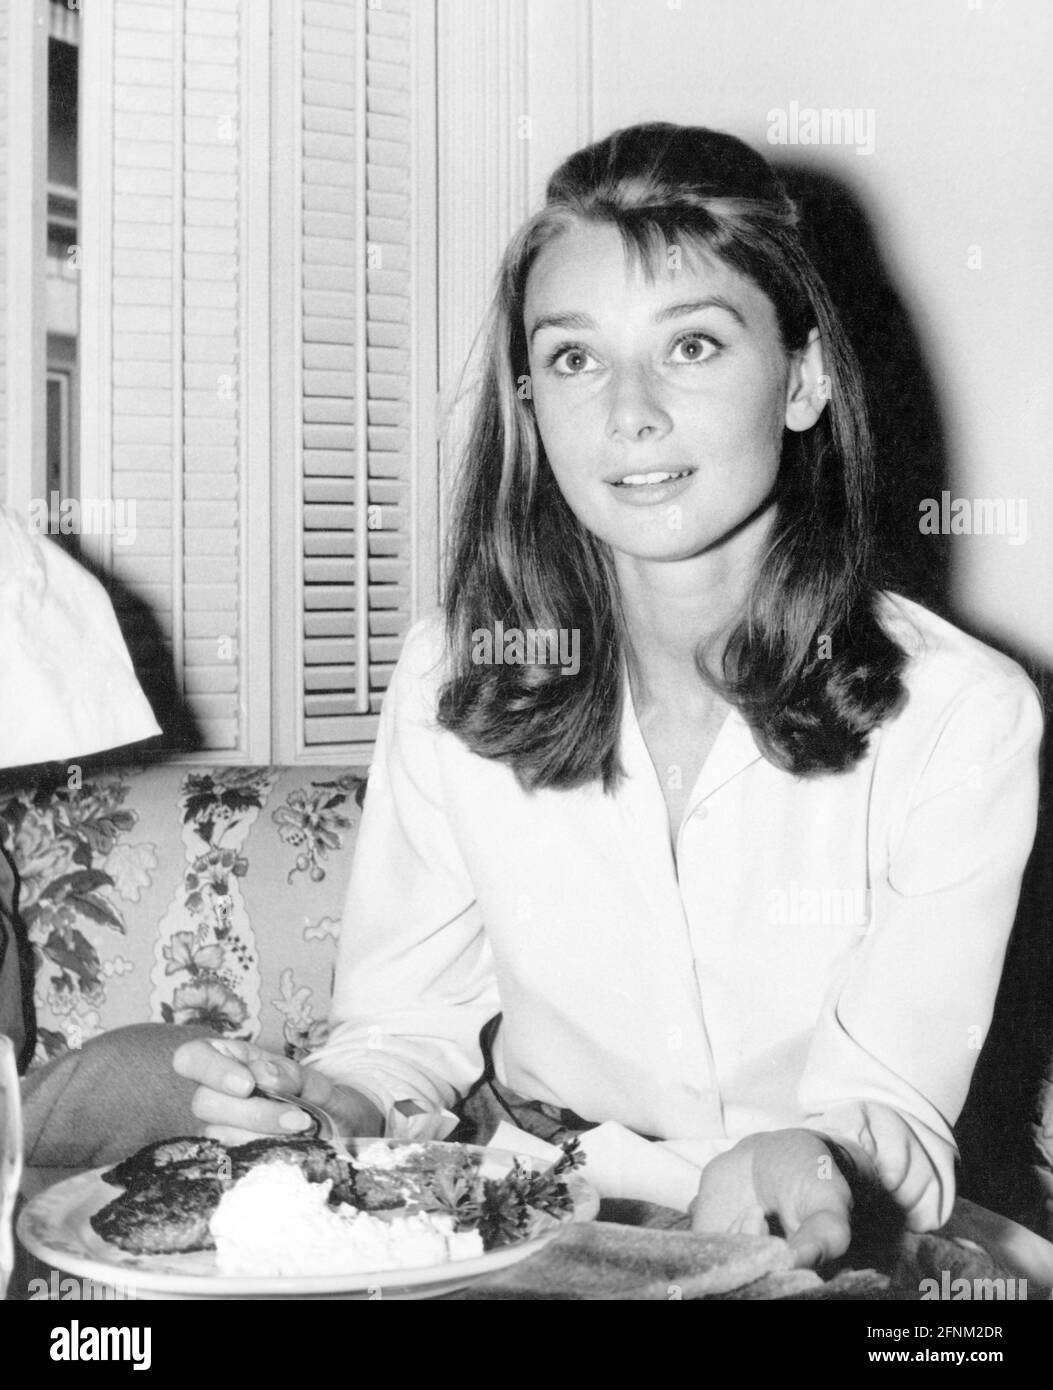 Hepburn, Audrey, 4.5.1929 - 20.1.1993, British actress, half length, eating, 1950s, ADDITIONAL-RIGHTS-CLEARANCE-INFO-NOT-AVAILABLE Stock Photo